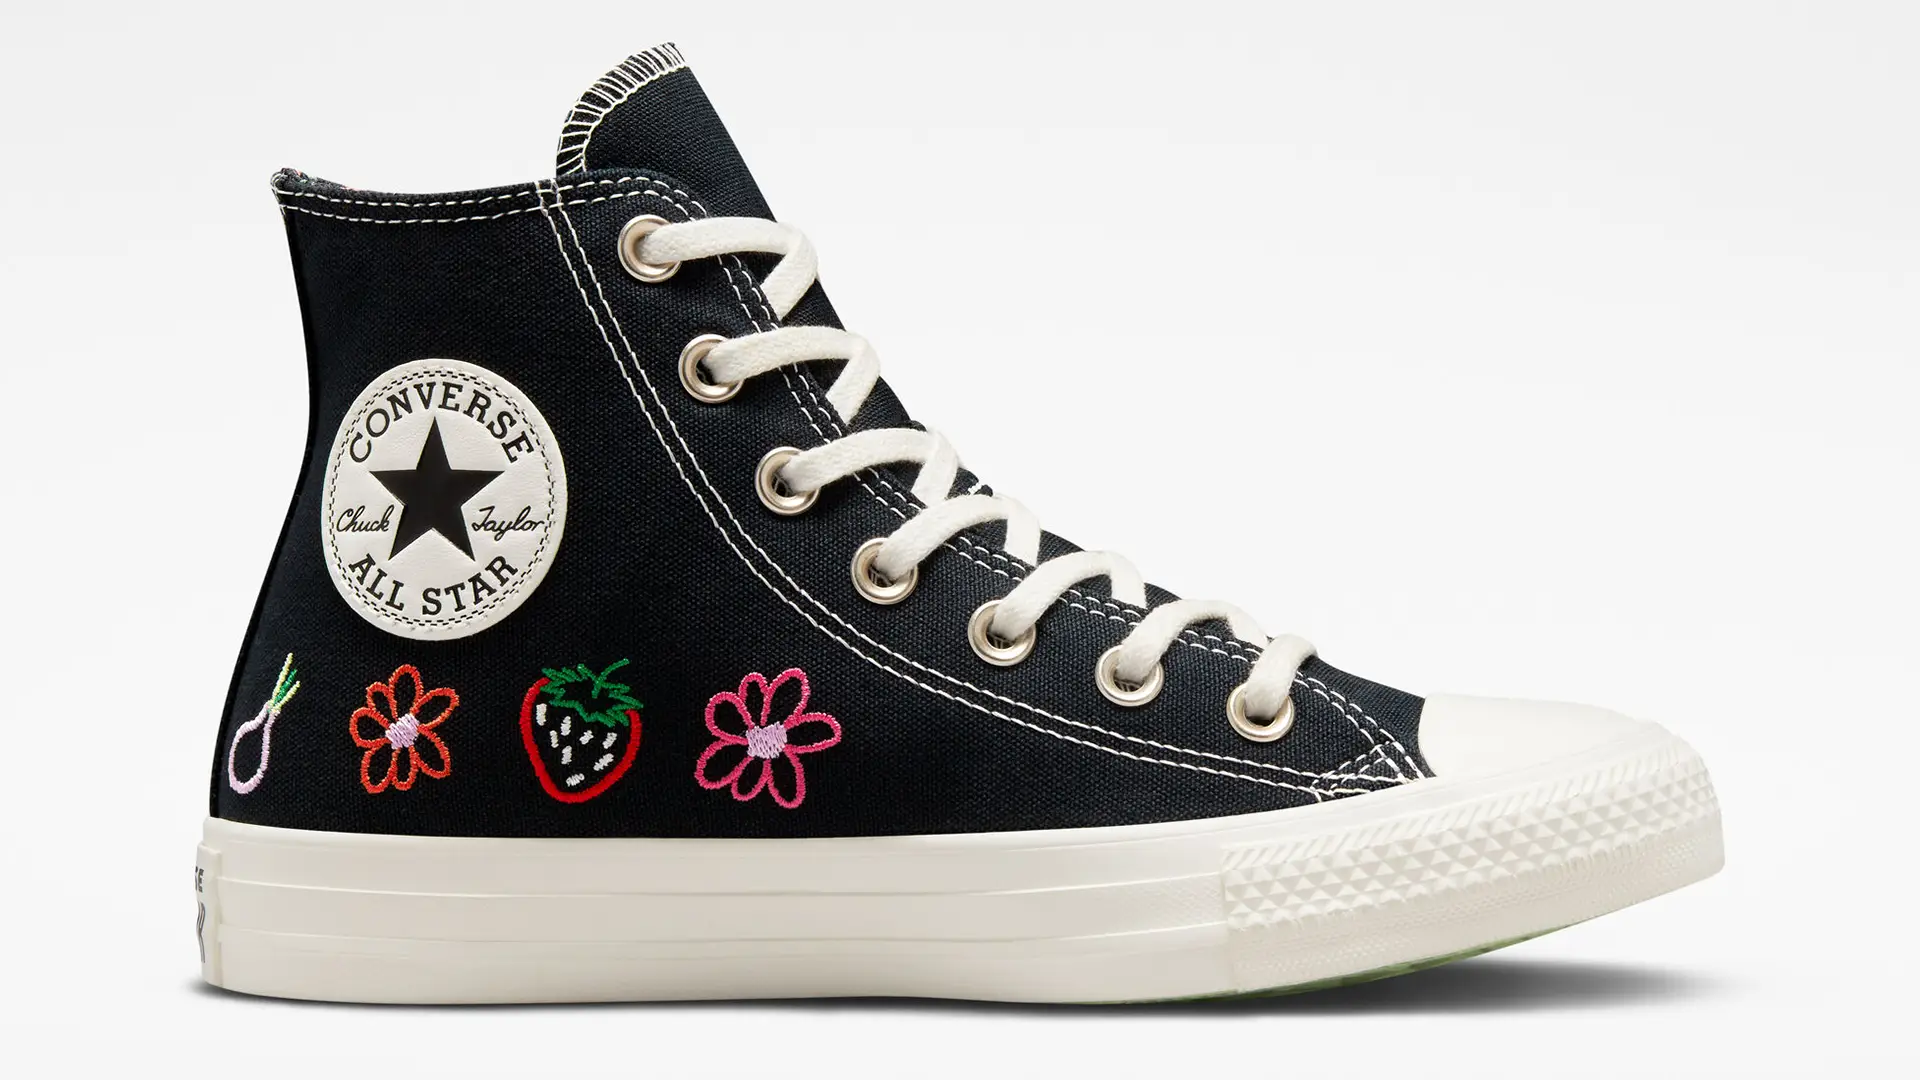 Golf Wang x Converse Chuck 70 Snake Festival-Ready with Converse's Latest Lineup